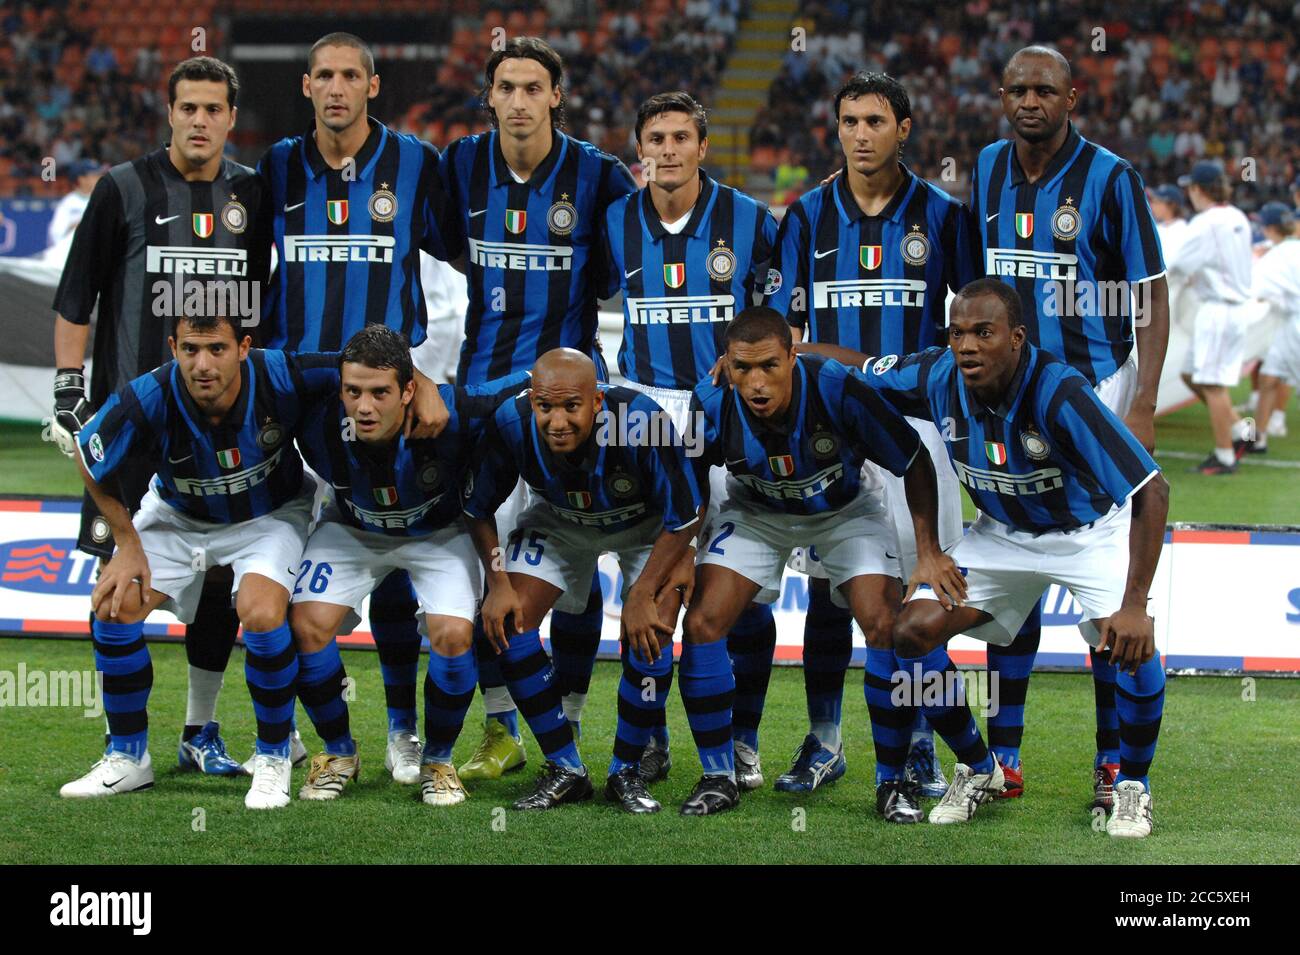 Milan  Italy, 19 August 2007, 'G.MEAZZA  ' Stadium,  Football Super Cup Trophy 2007,   FC Inter - AS Roma : The Inter players before the match Stock Photo